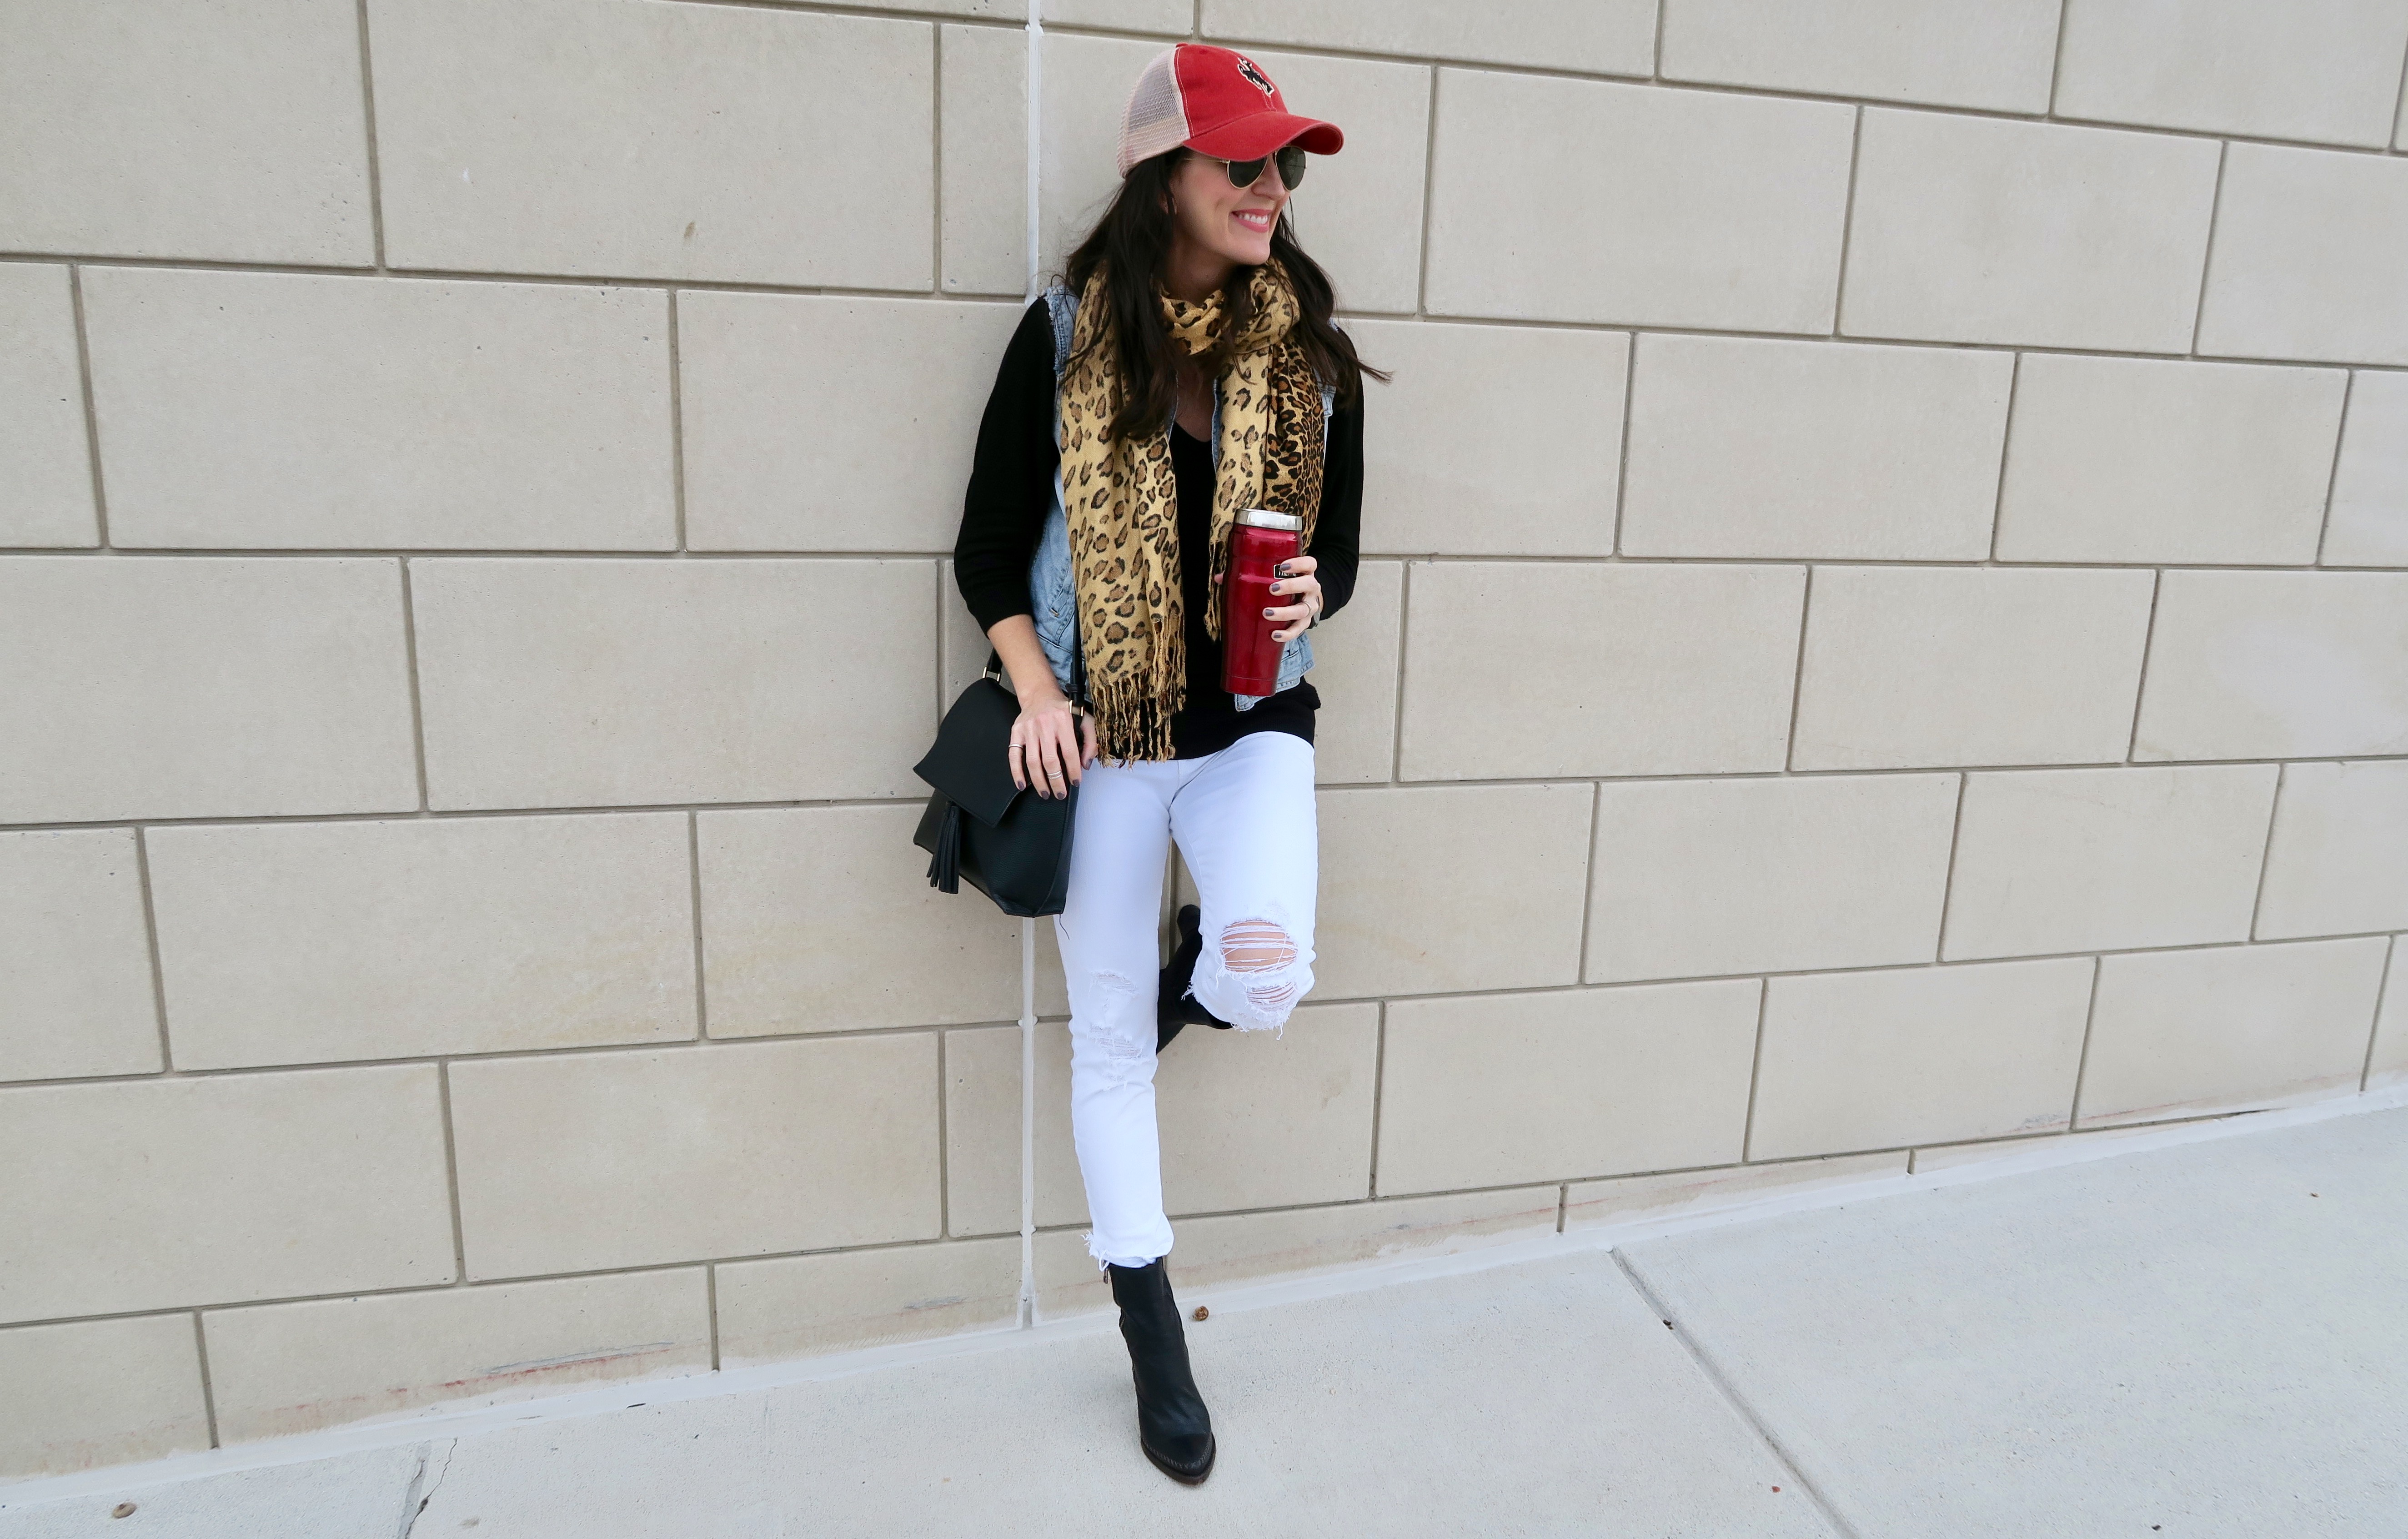 How To Look Chic Wearing A Baseball Hat + A Video